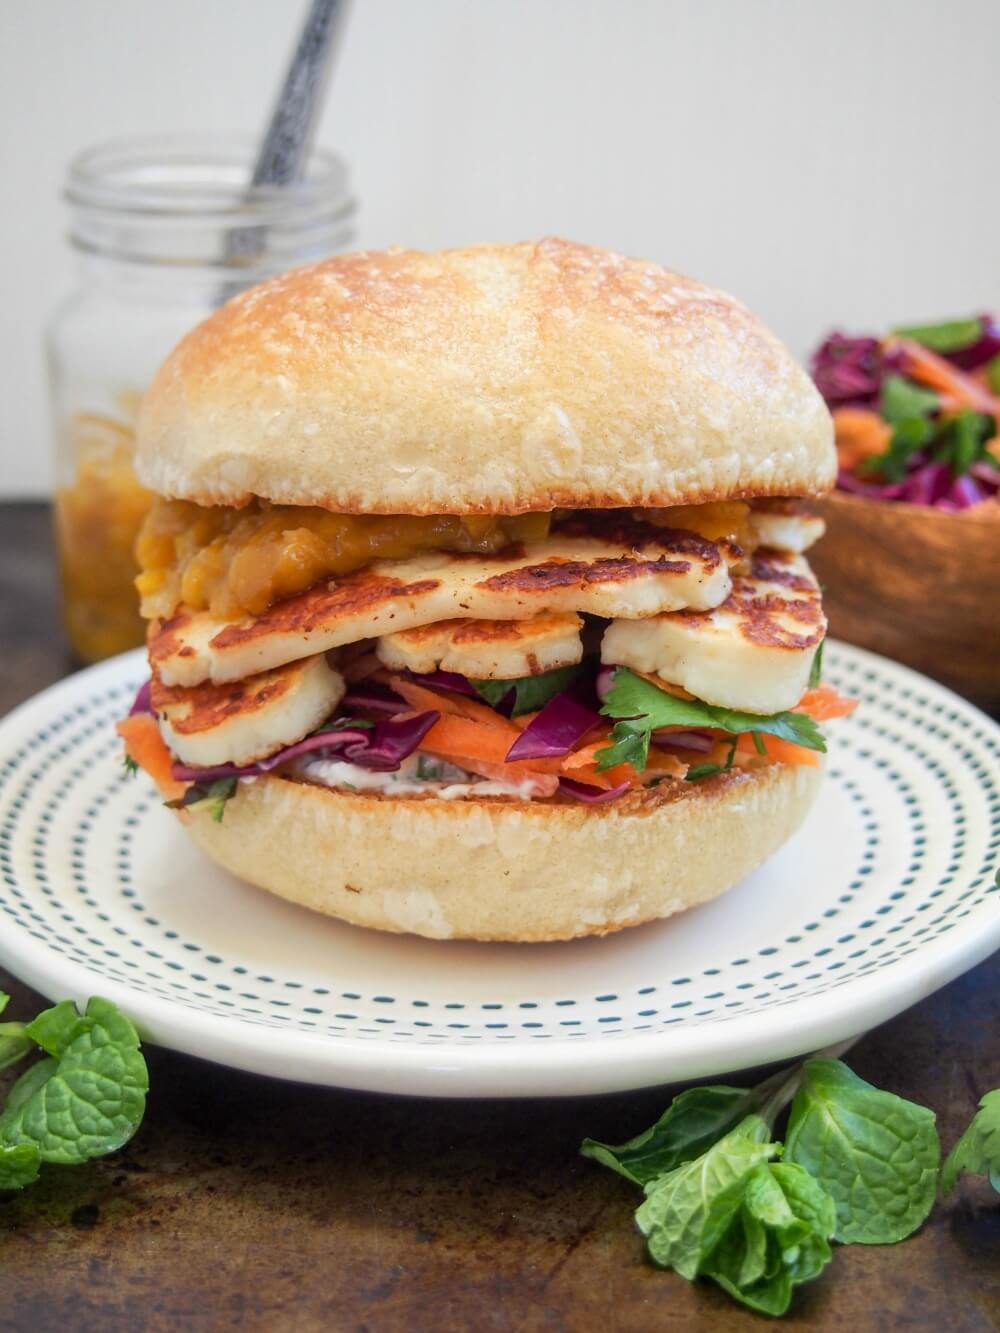 halloumi burger on plate showing slaw under and mango sauce on top of halloumi slices